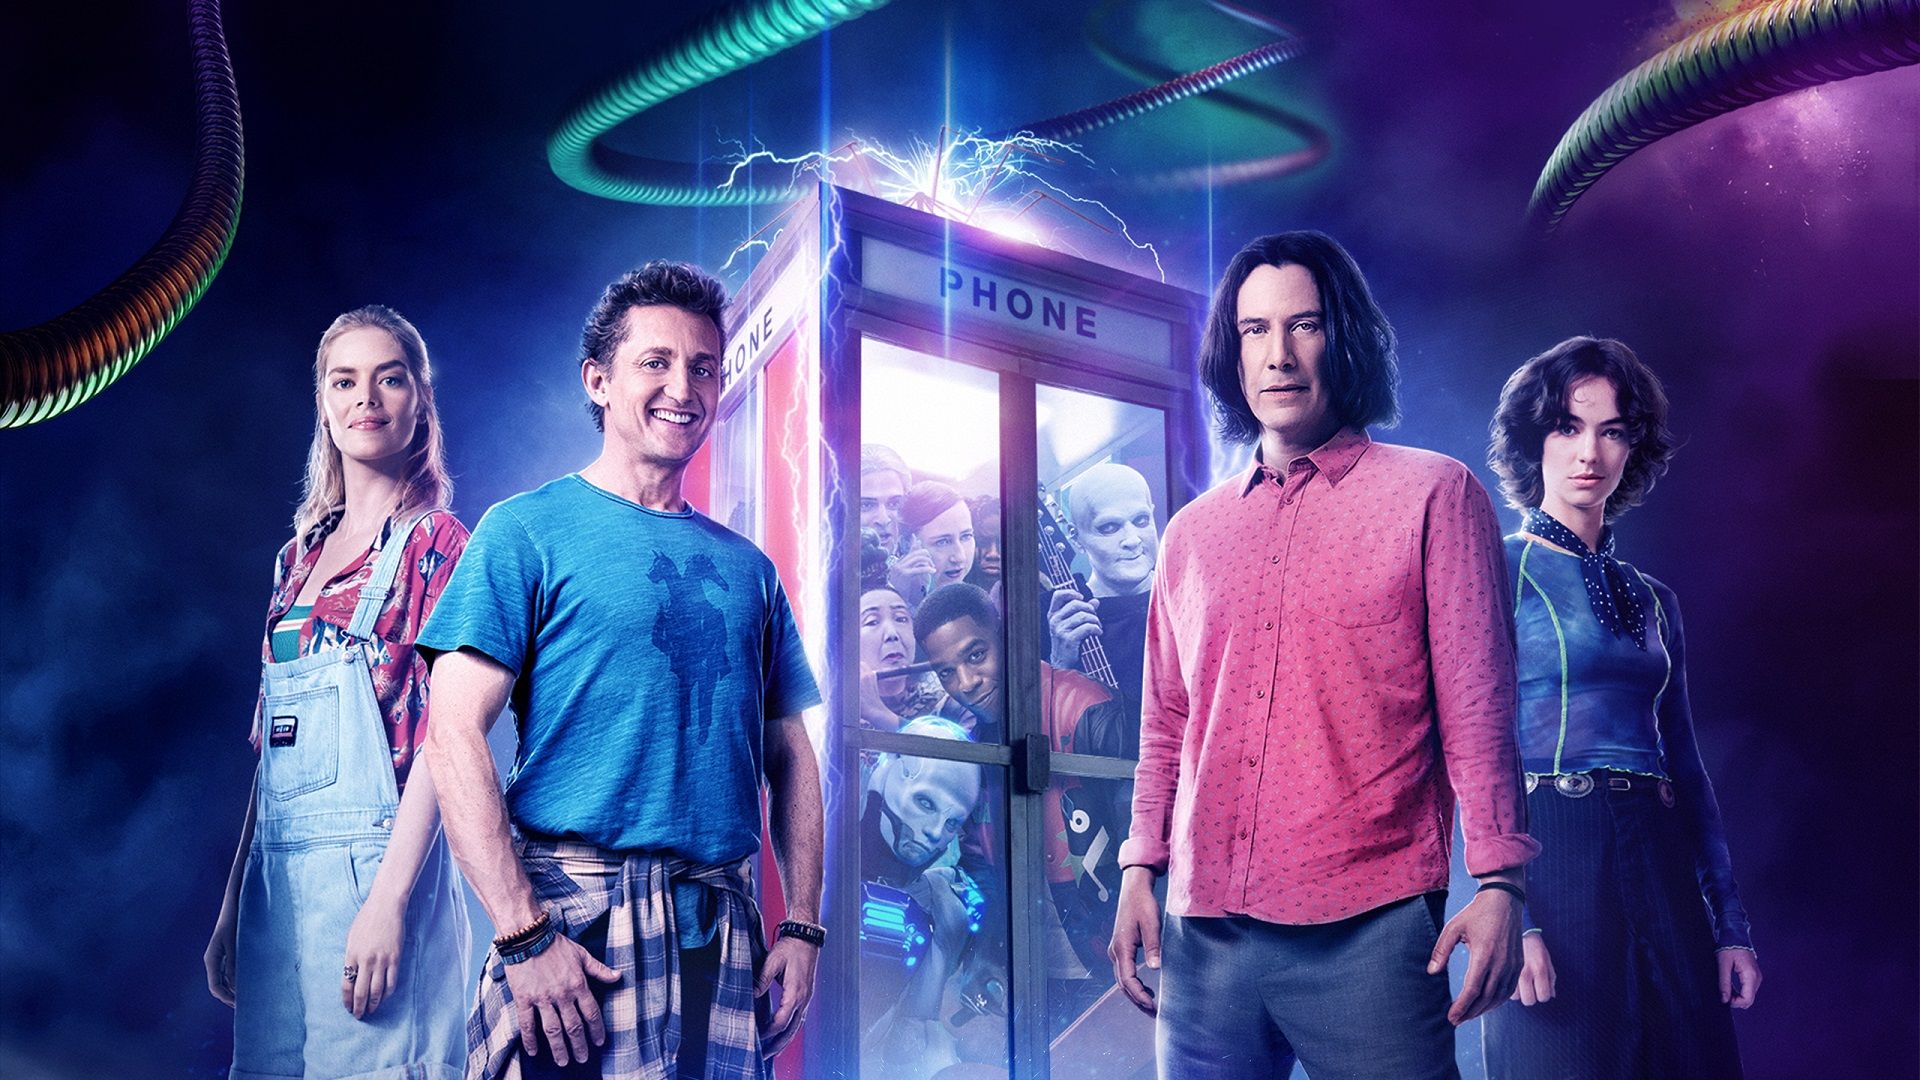 Bill & Ted Face the Music background